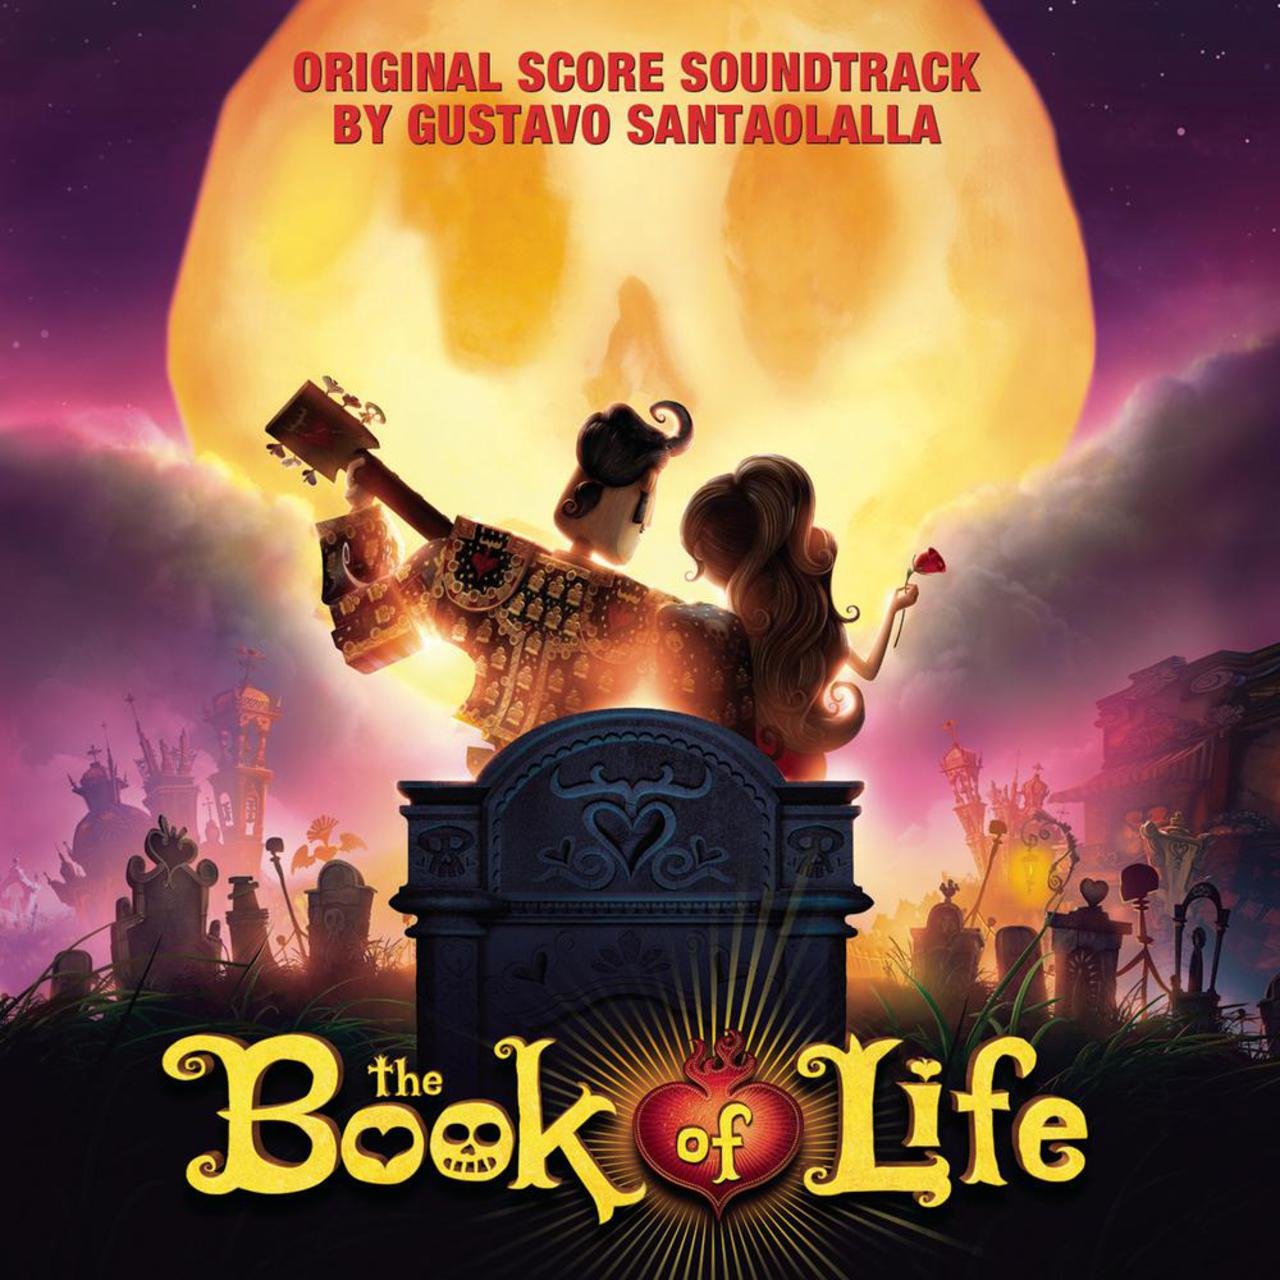 The Book of Life (Original Score Soundtrack) | The Book of Life Wiki | FANDOM powered by Wikia